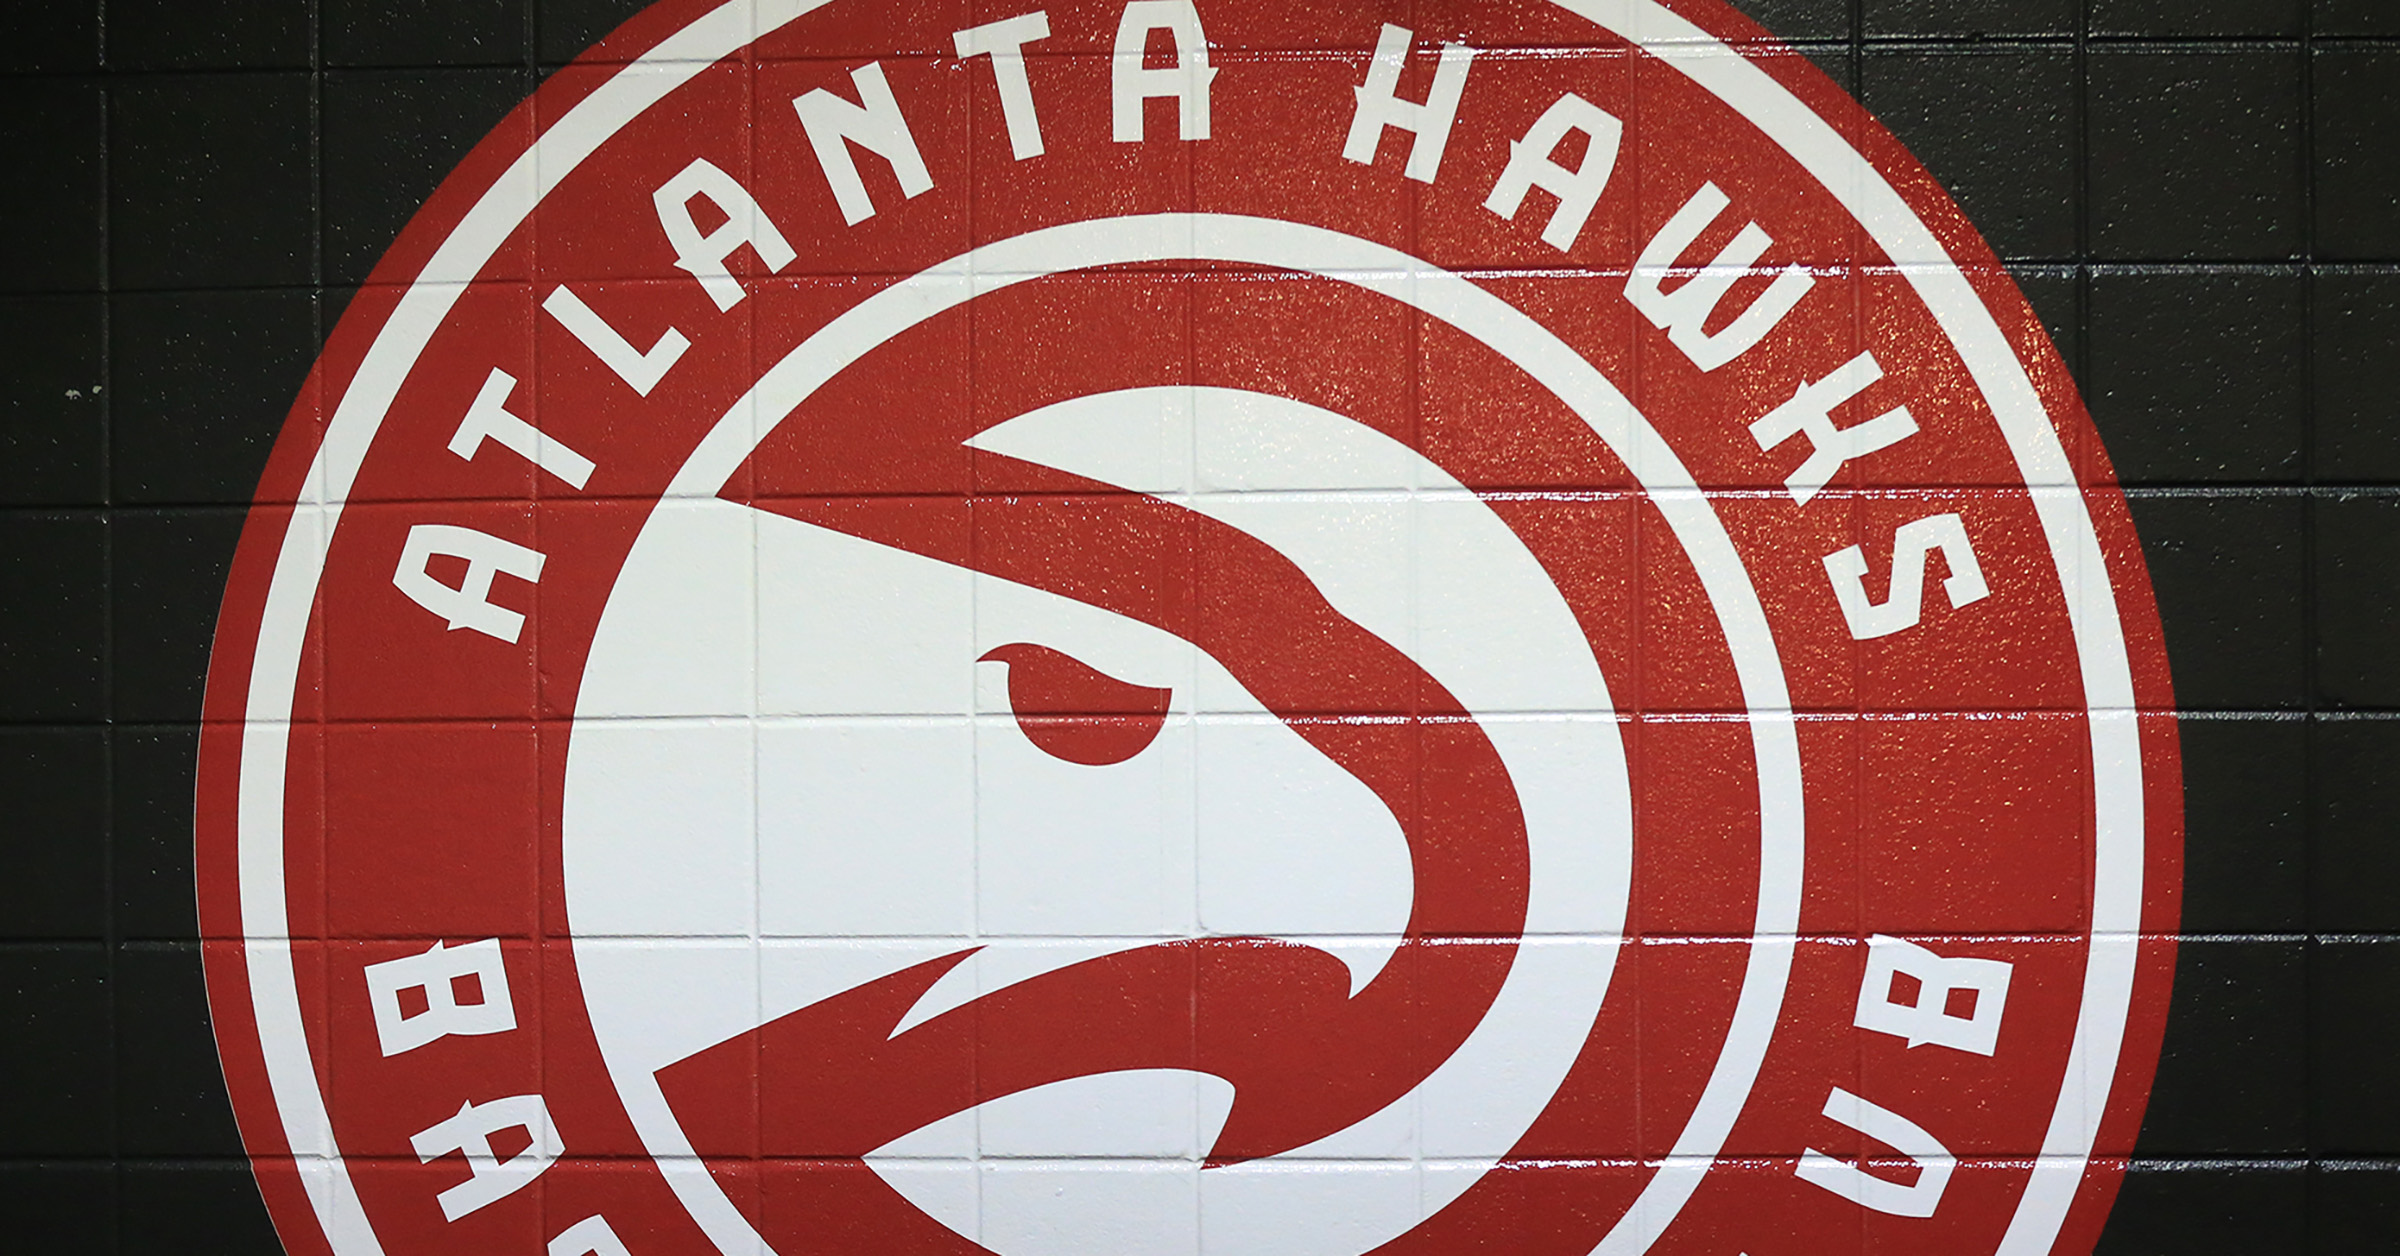 Experience the excitement of the Atlanta Hawks and score tickets